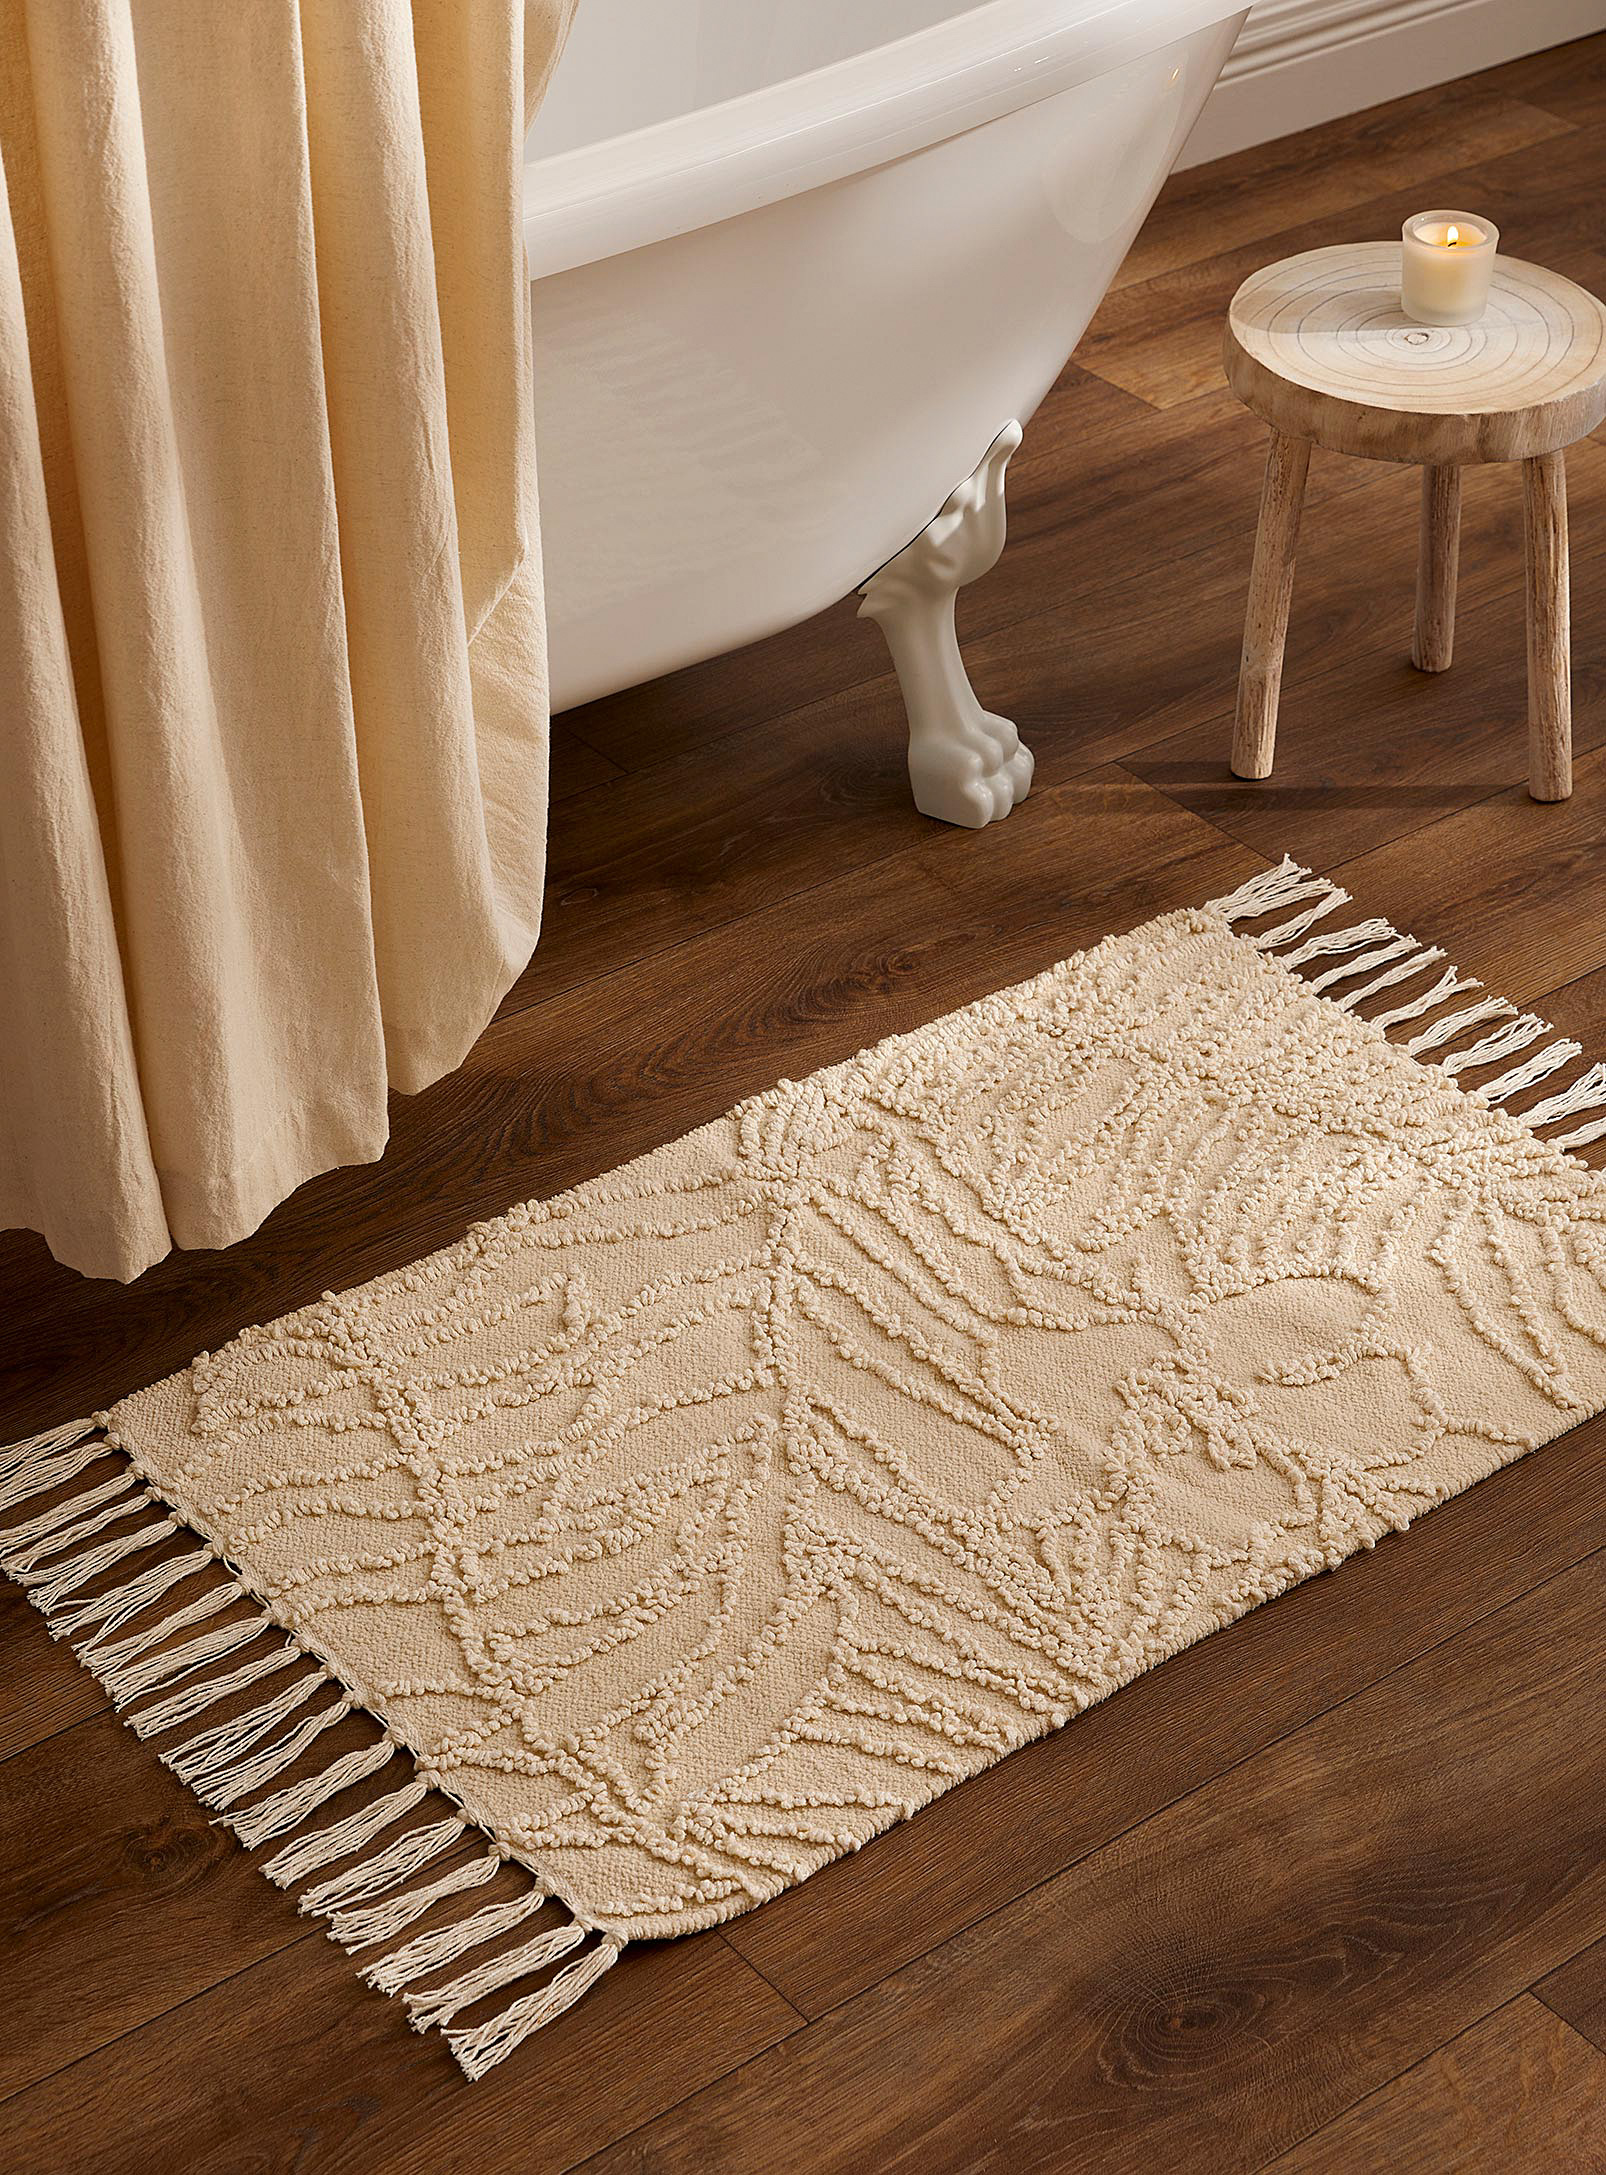 Samantha Pynn X Simons Embossed Knot Leaves Recycled Cotton Bath Mat 50 X 80 Cm In Burgundy